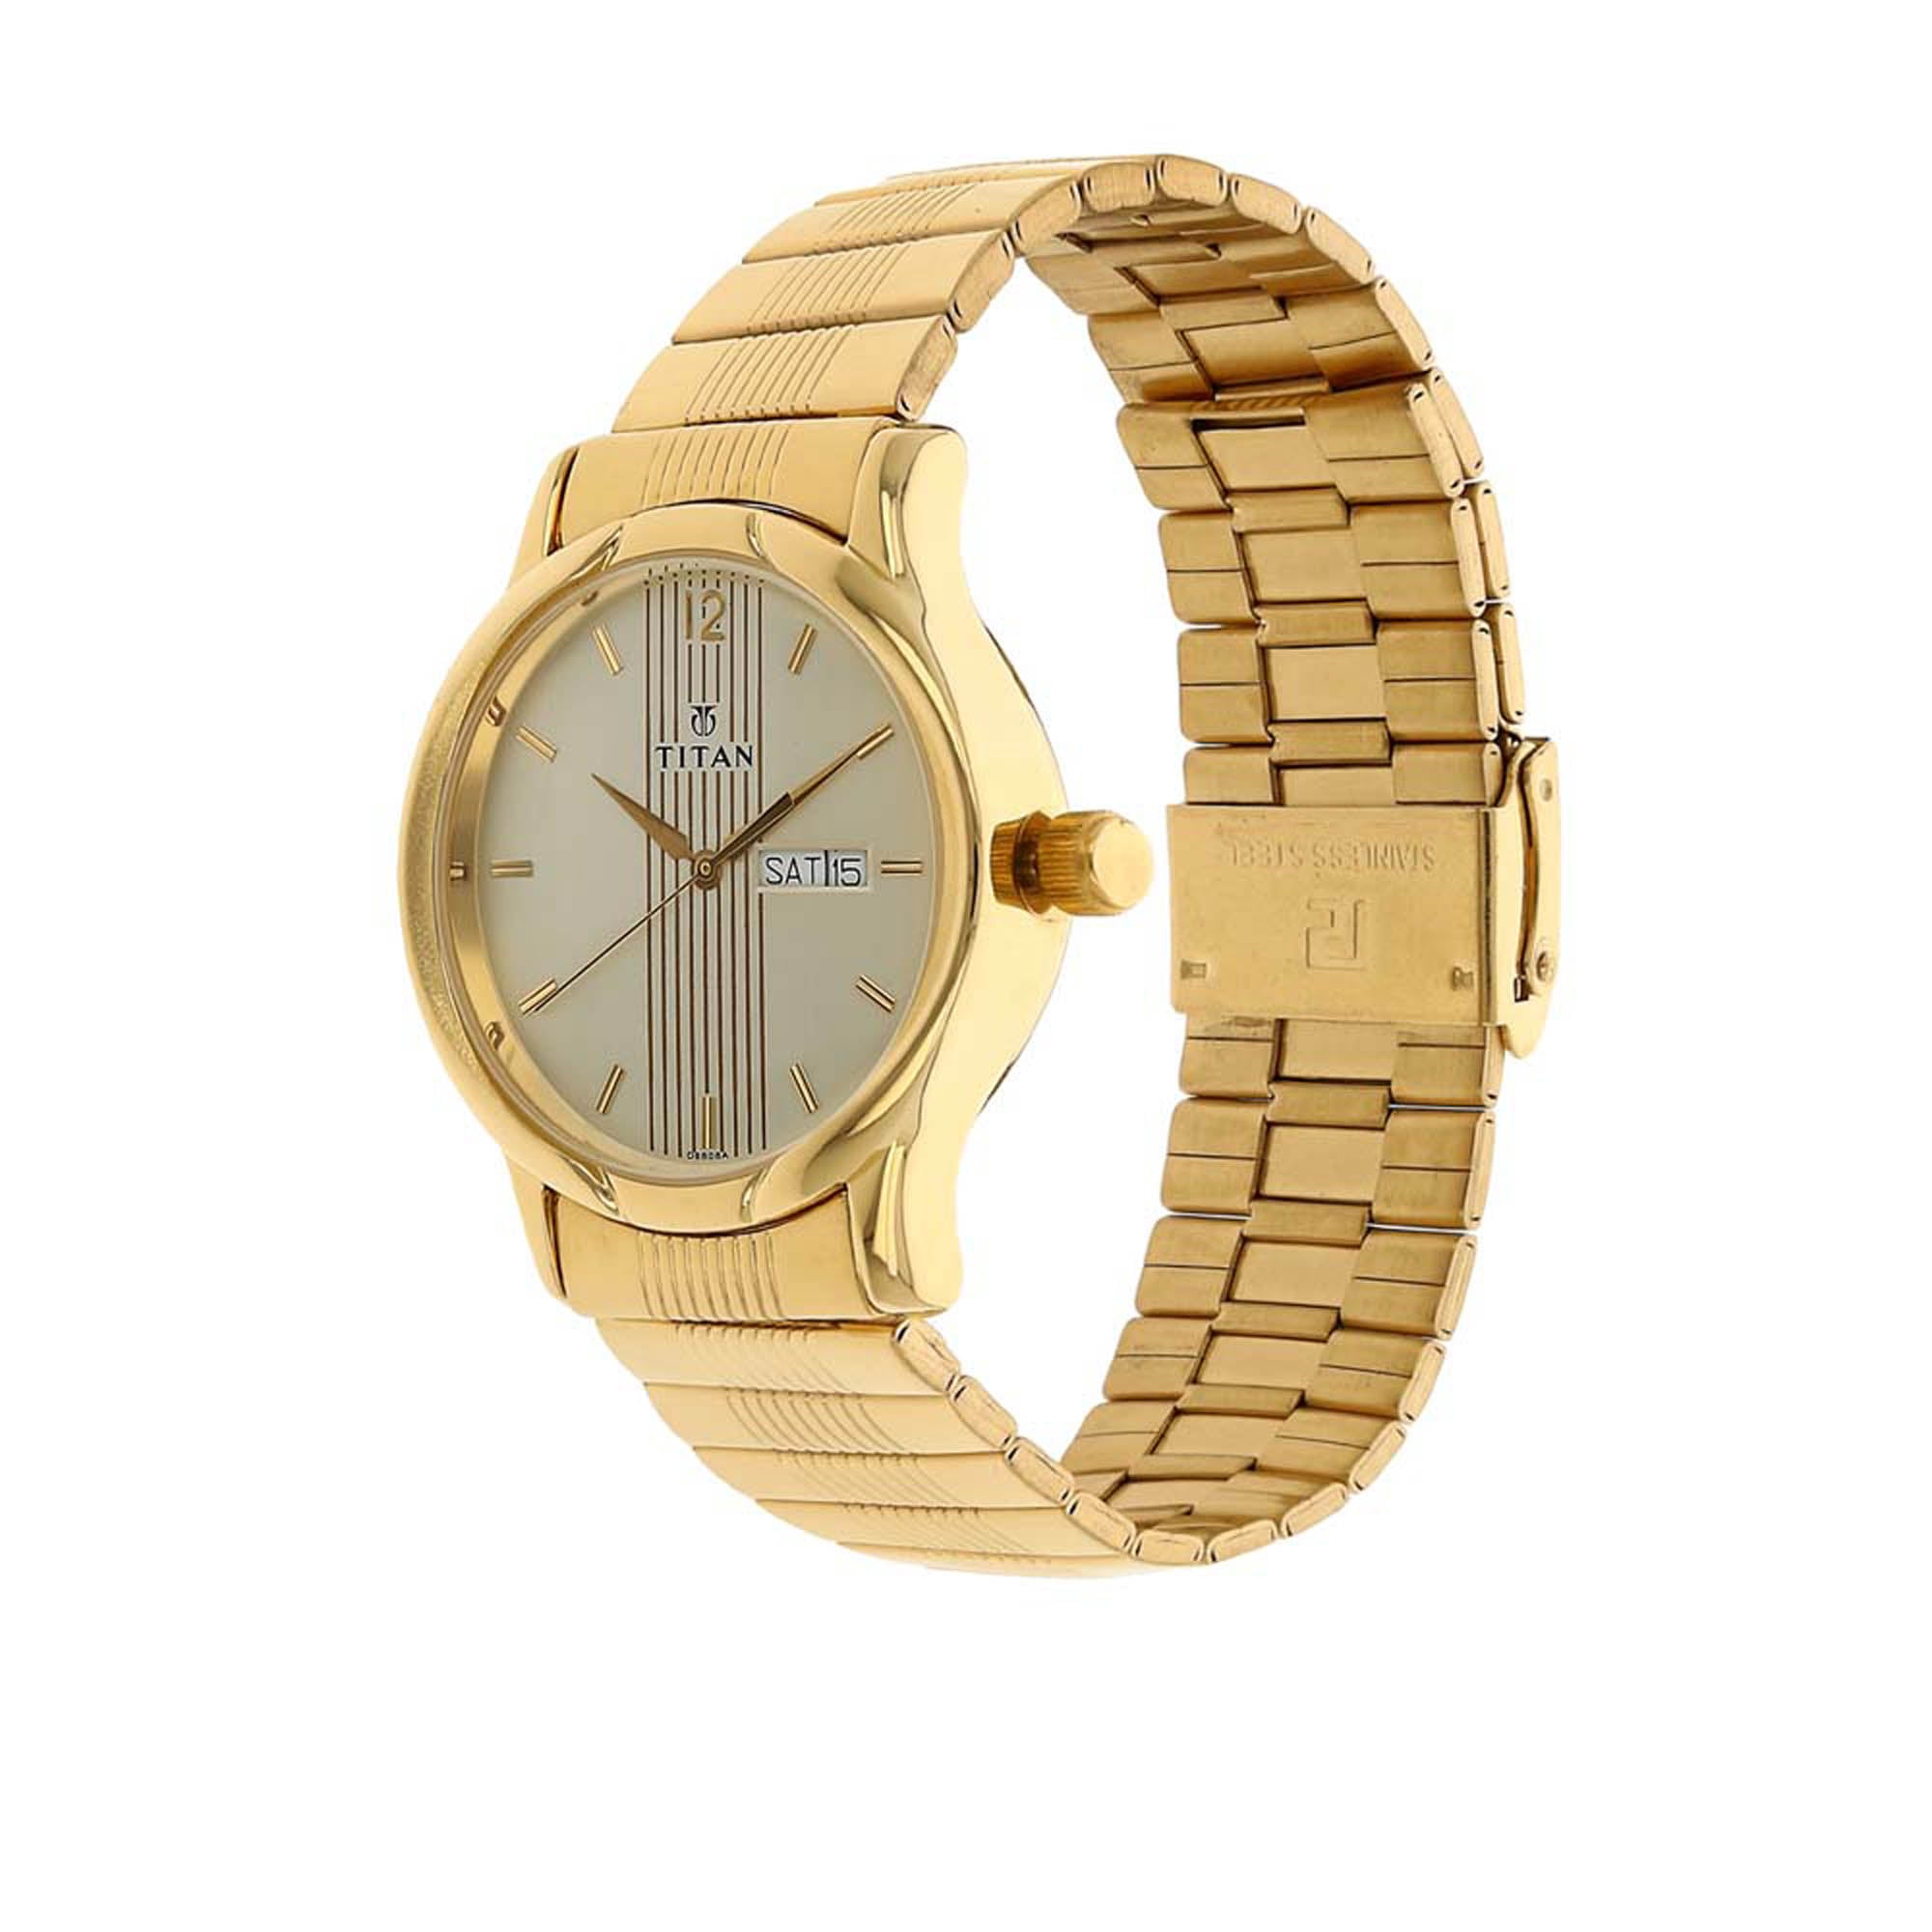 Titan Analog with Day and Date Champagne Dial Metal Strap watch for Men